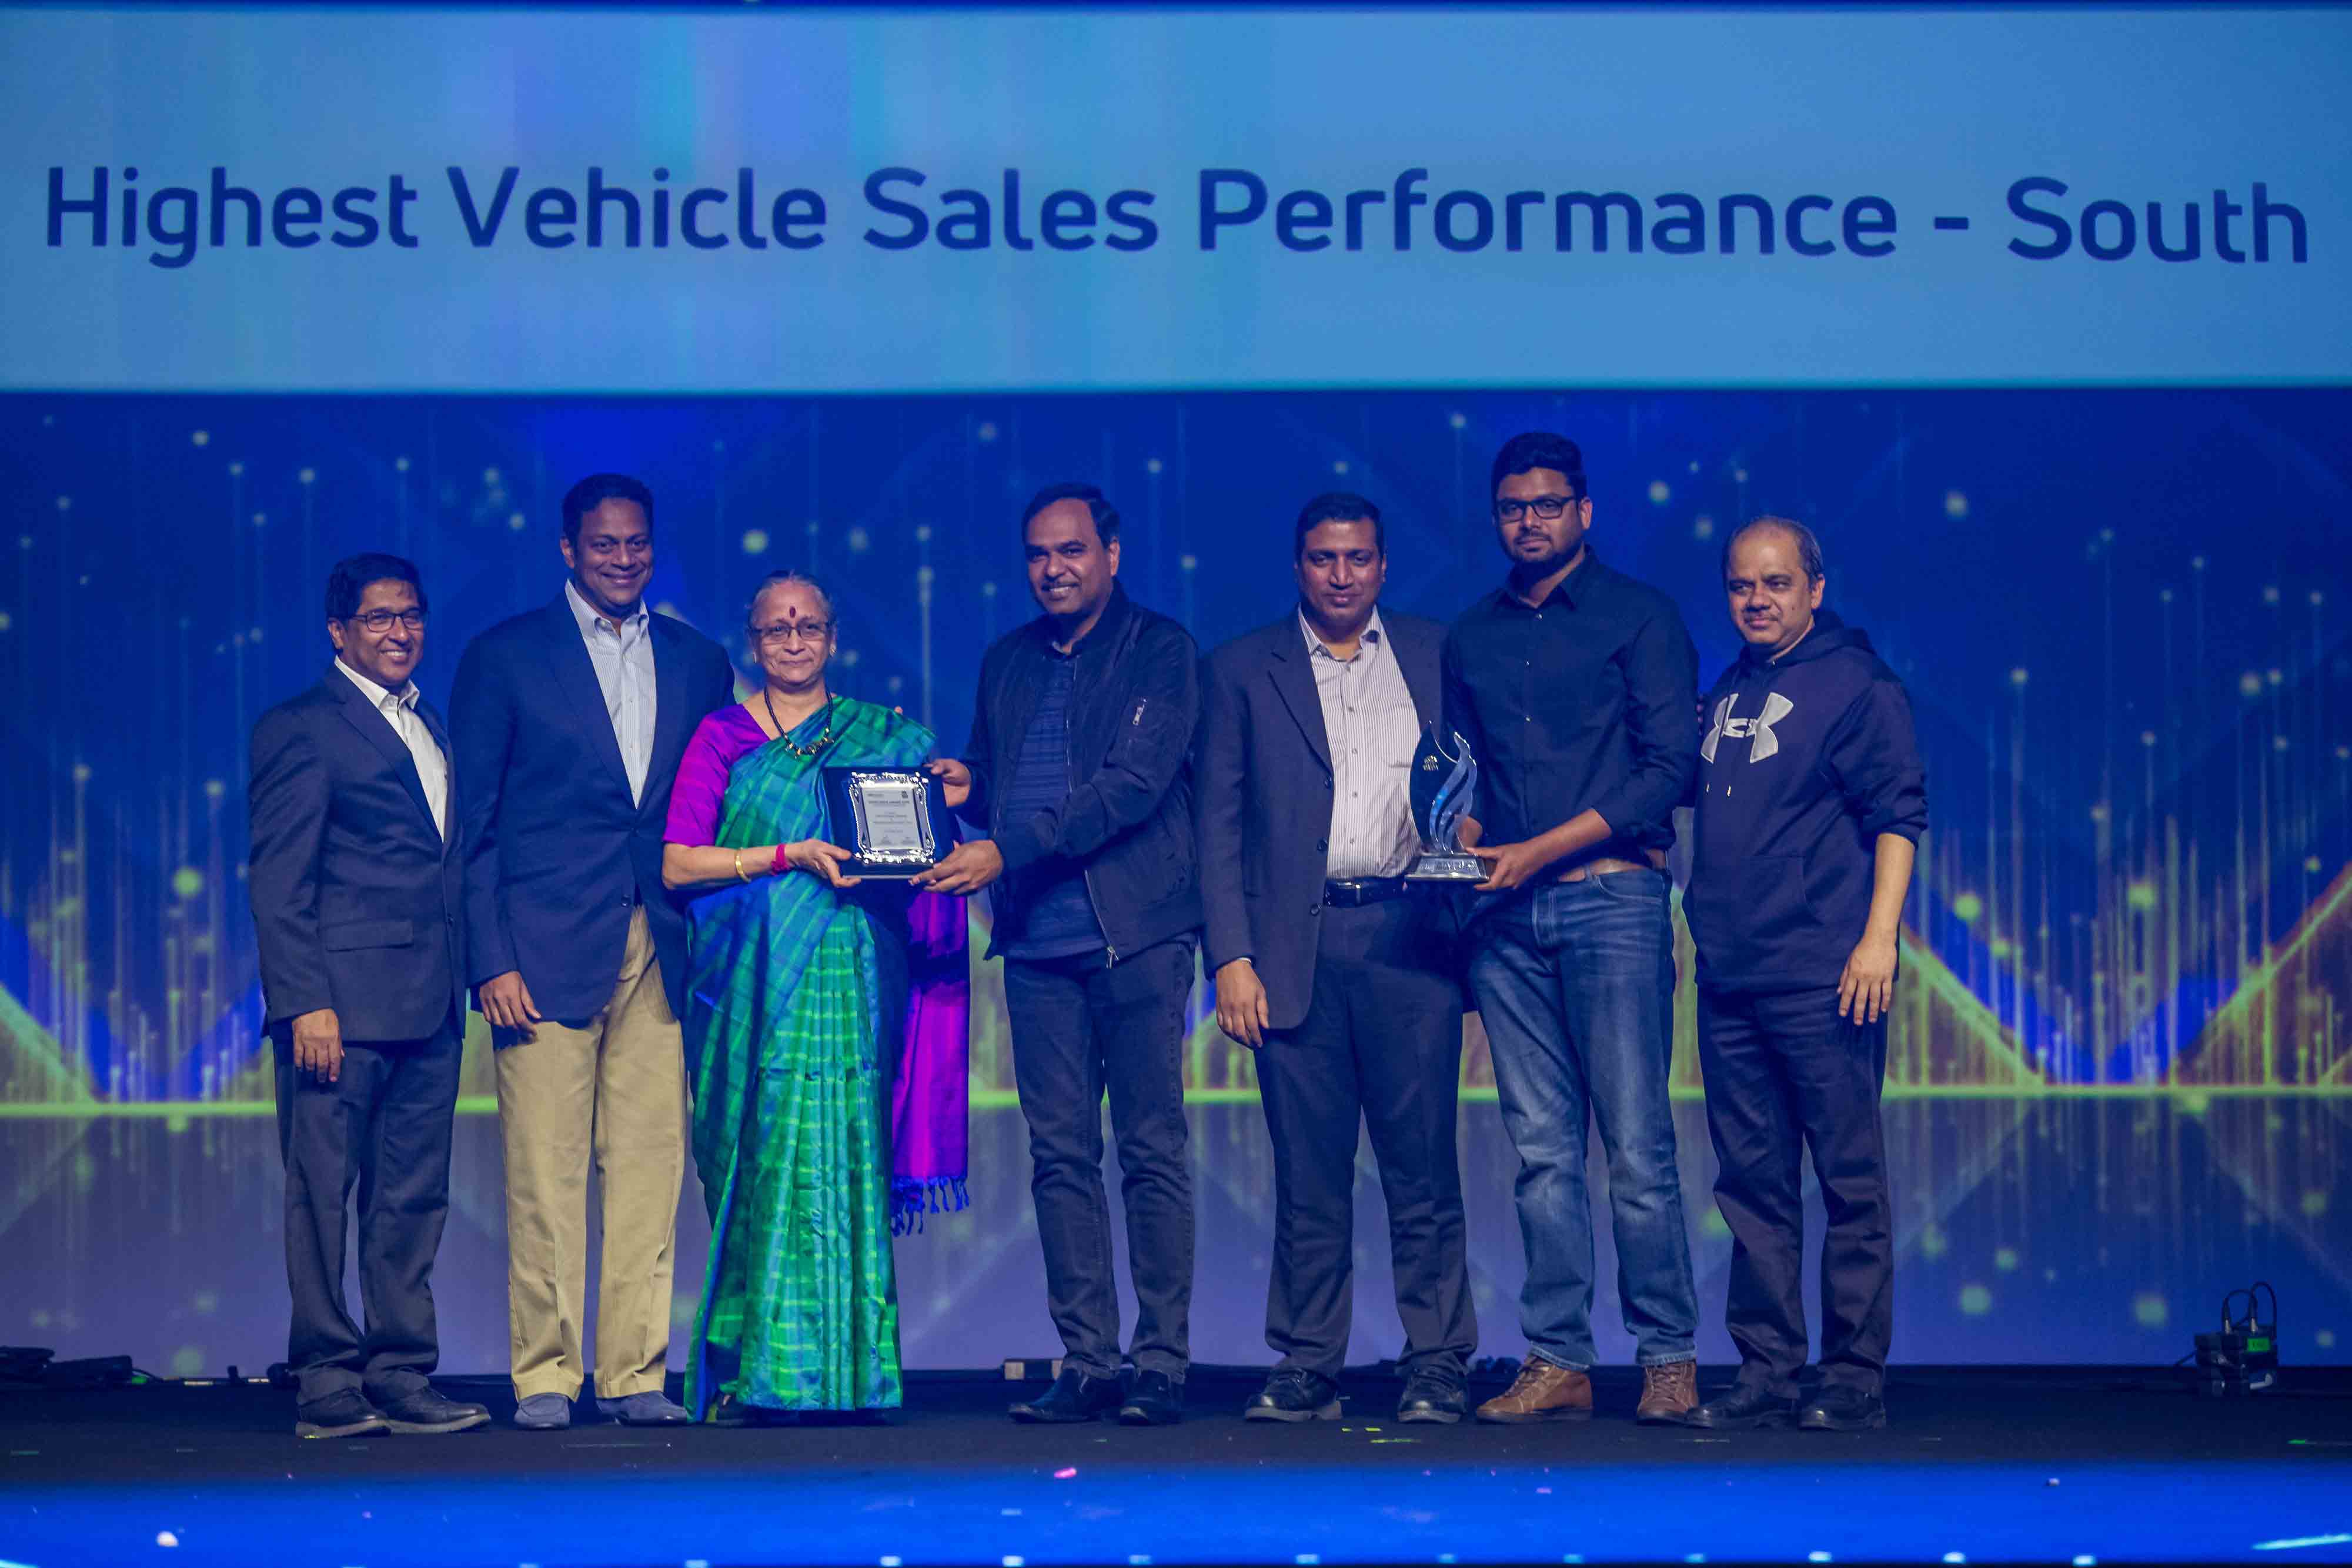 Highest Vehicle Sales Performance - South